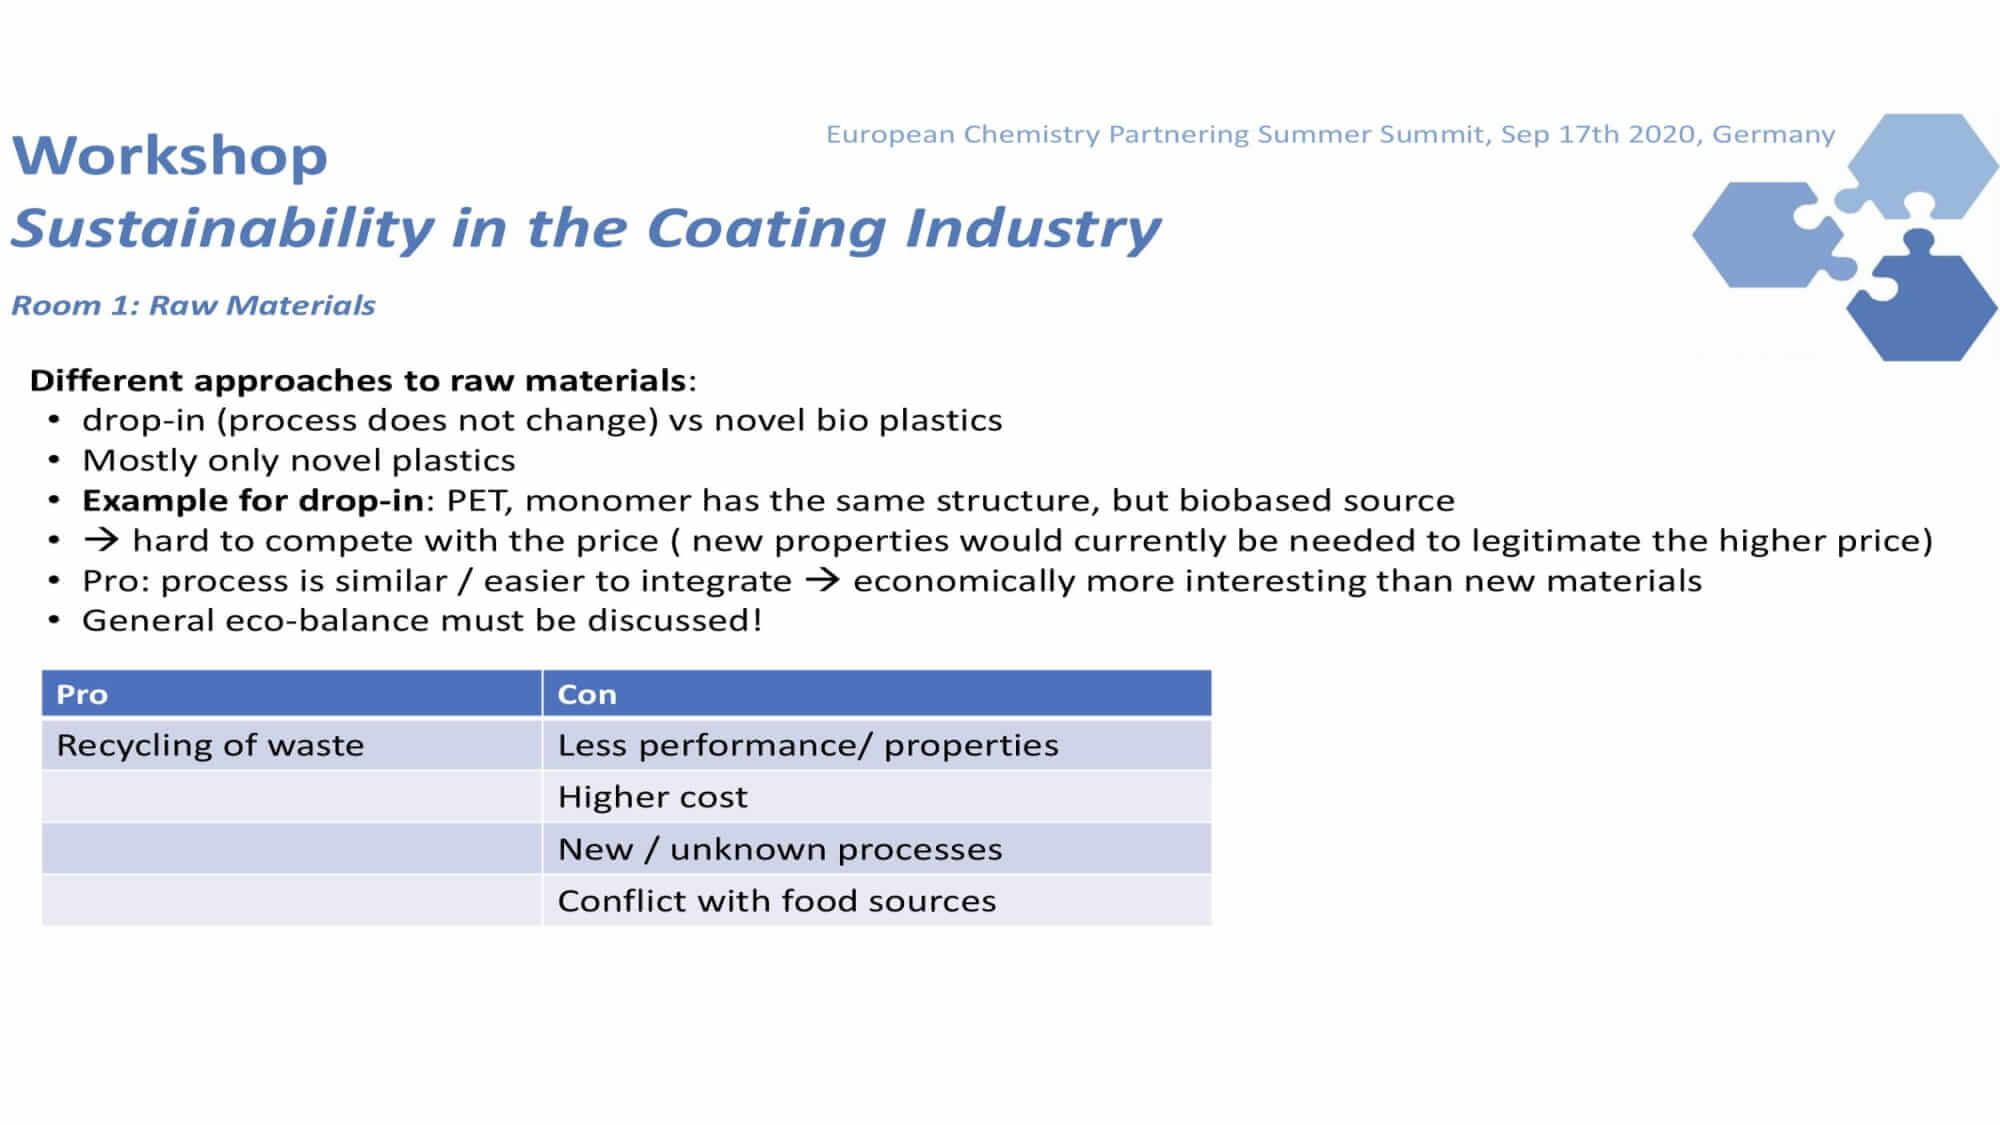 Had a chance to Judge, grade, Mentor and Certify the 3rd European Chemical Partnership Coating industry event